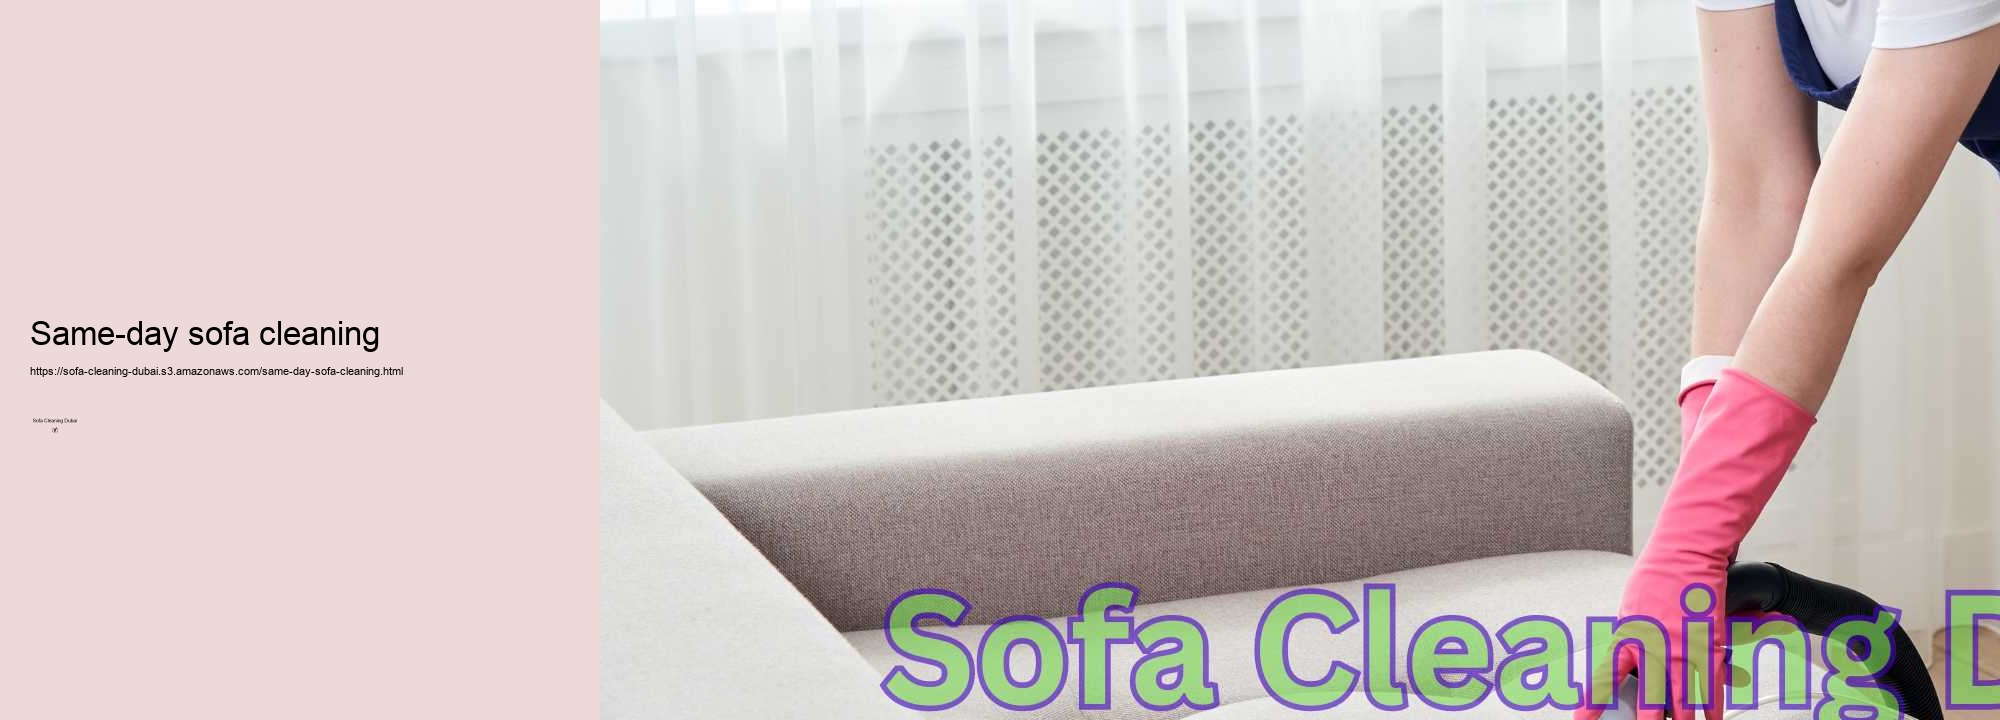 Same-day sofa cleaning